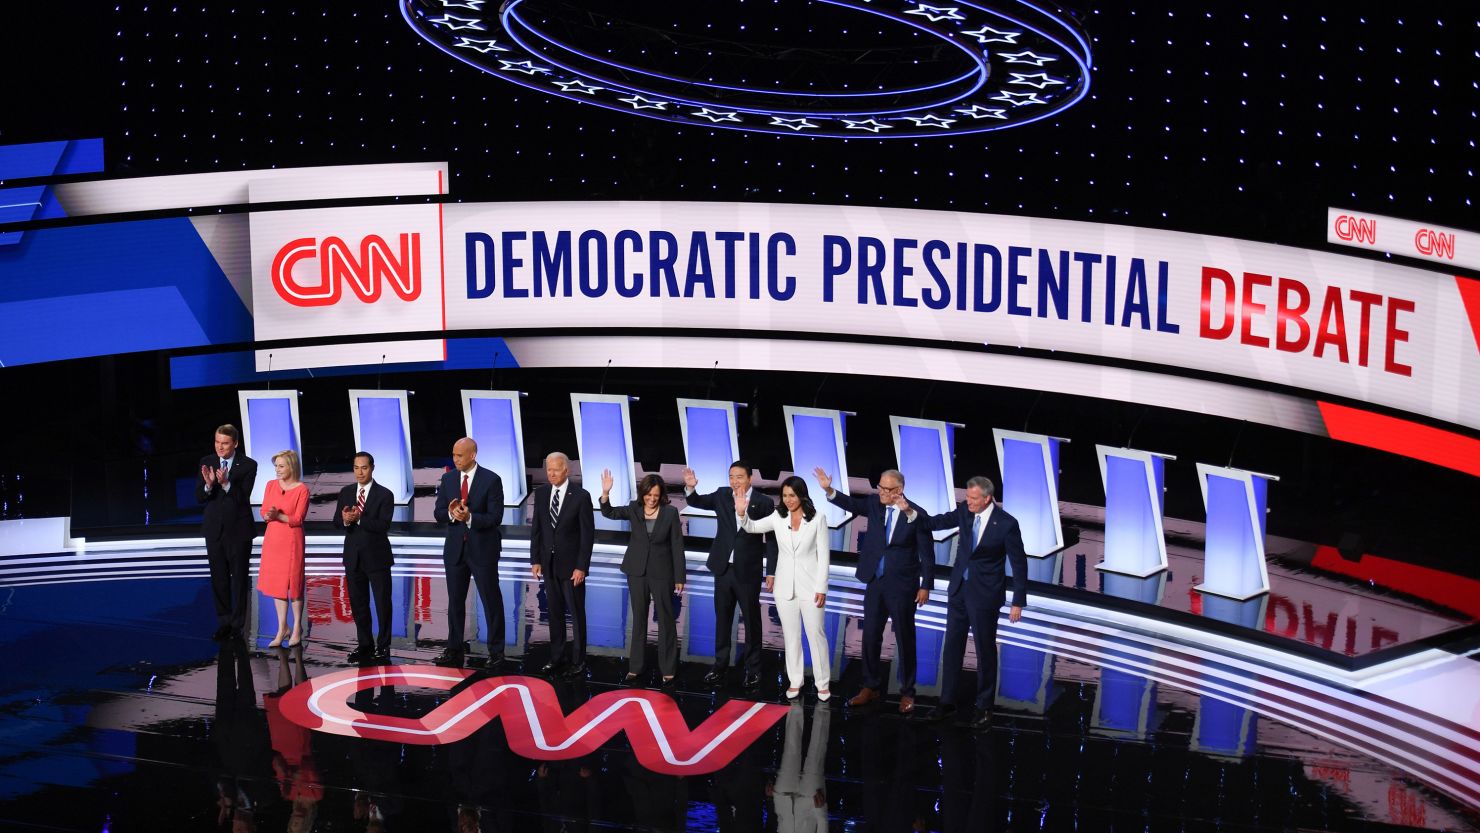 Democratic presidential candidates wave from the stage ahead of the second round of the second Democratic primary debate of the 2020 presidential campaign season hosted by CNN at the Fox Theatre in Detroit, Michigan on July 31, 2019. 